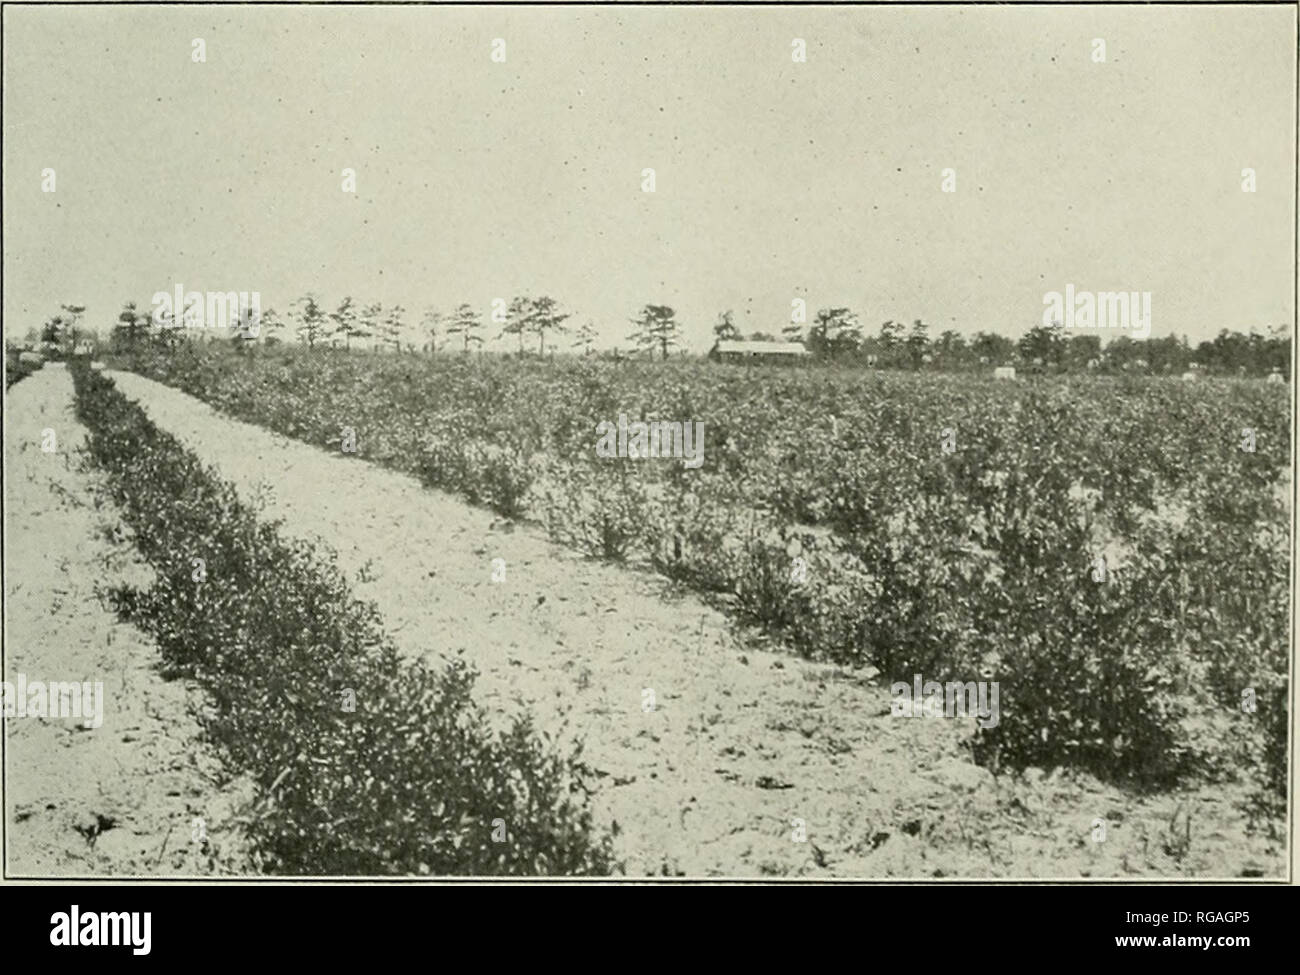 . Bulletin of the U.S. Department of Agriculture. Agriculture; Agriculture. Fig. I.- -Plantation of 2-Year-Old and 3-Year-Old Hybrid Blueberries AT Whitesbog, N. J. The soil is a wliite sand mixed with upland peat and is strongly and permanently acid. The rows are 8 feet apart, the plants 4 feet apart in the row. The row at the left consists of 3-year-old plants; the others are 2 years old. Each of these plants is a seedling hybrid, and although of carefully selected pa'rentage its own qualities can not be kaown until it fruits. The photograph'was taken August 2, 1917.. Fig. 2. From ( -Plantat Stock Photo